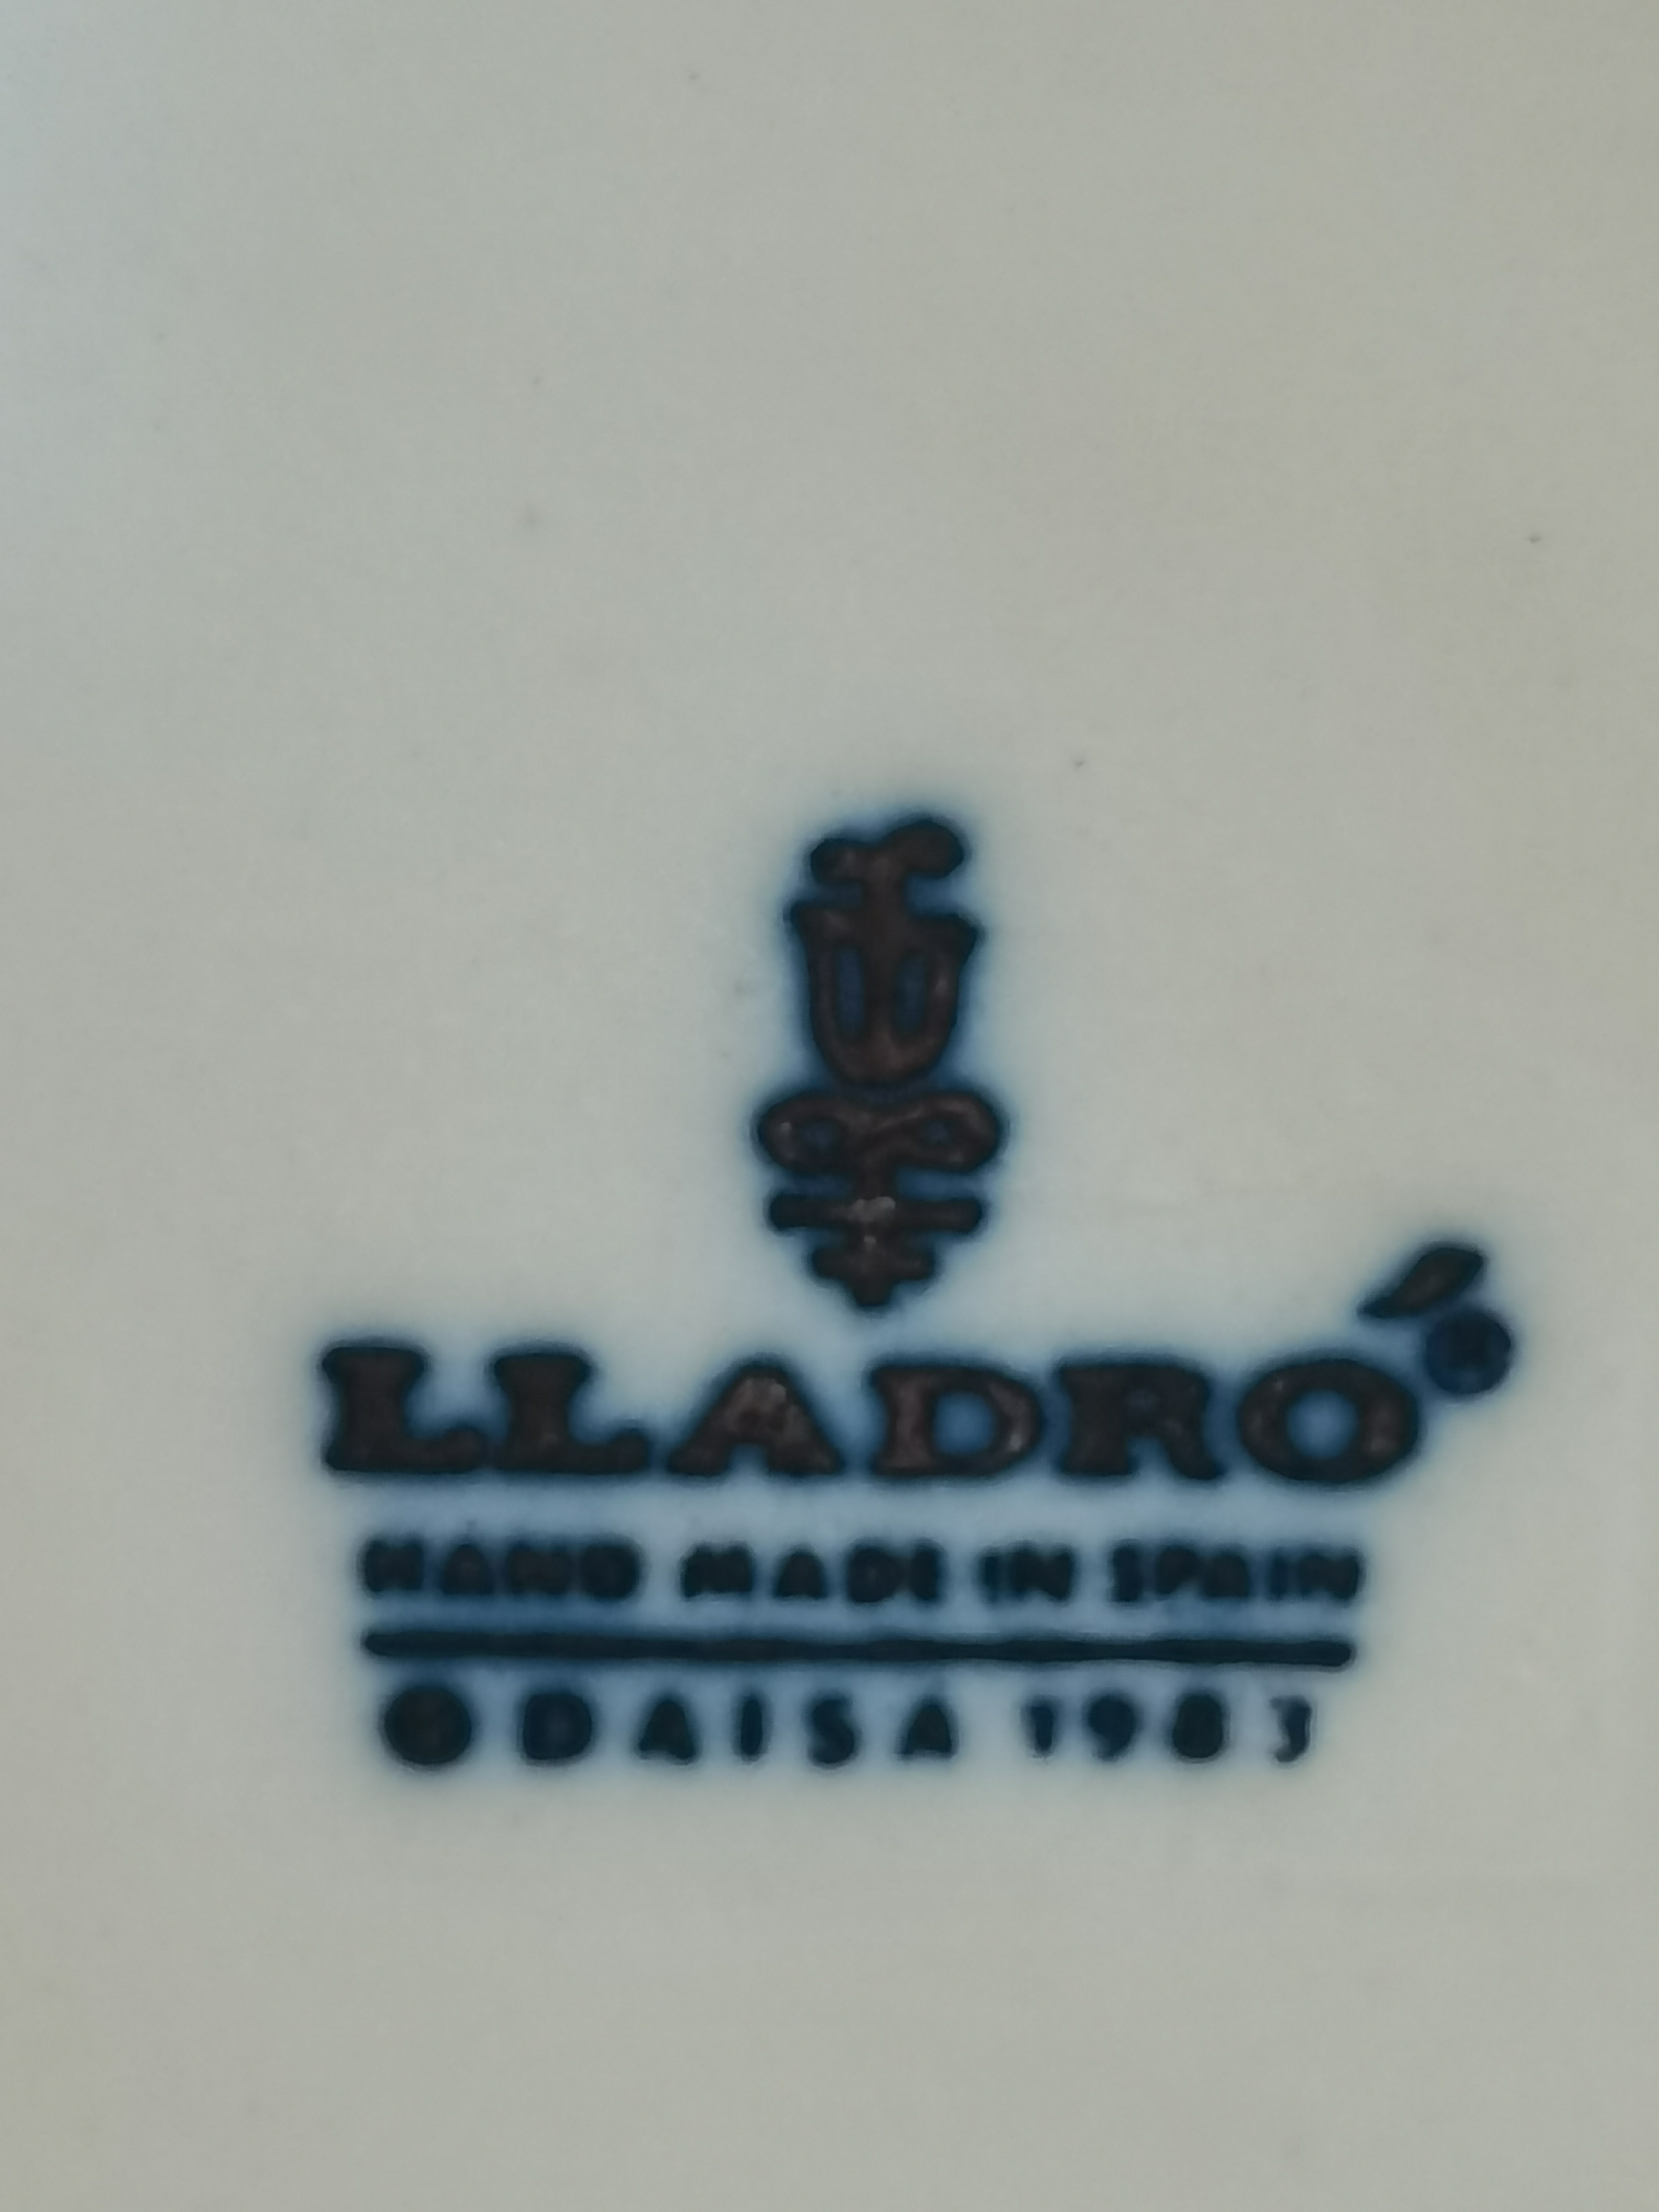 4 x Nao/ Lladro figures plus a Yardley soap dish - Image 5 of 12